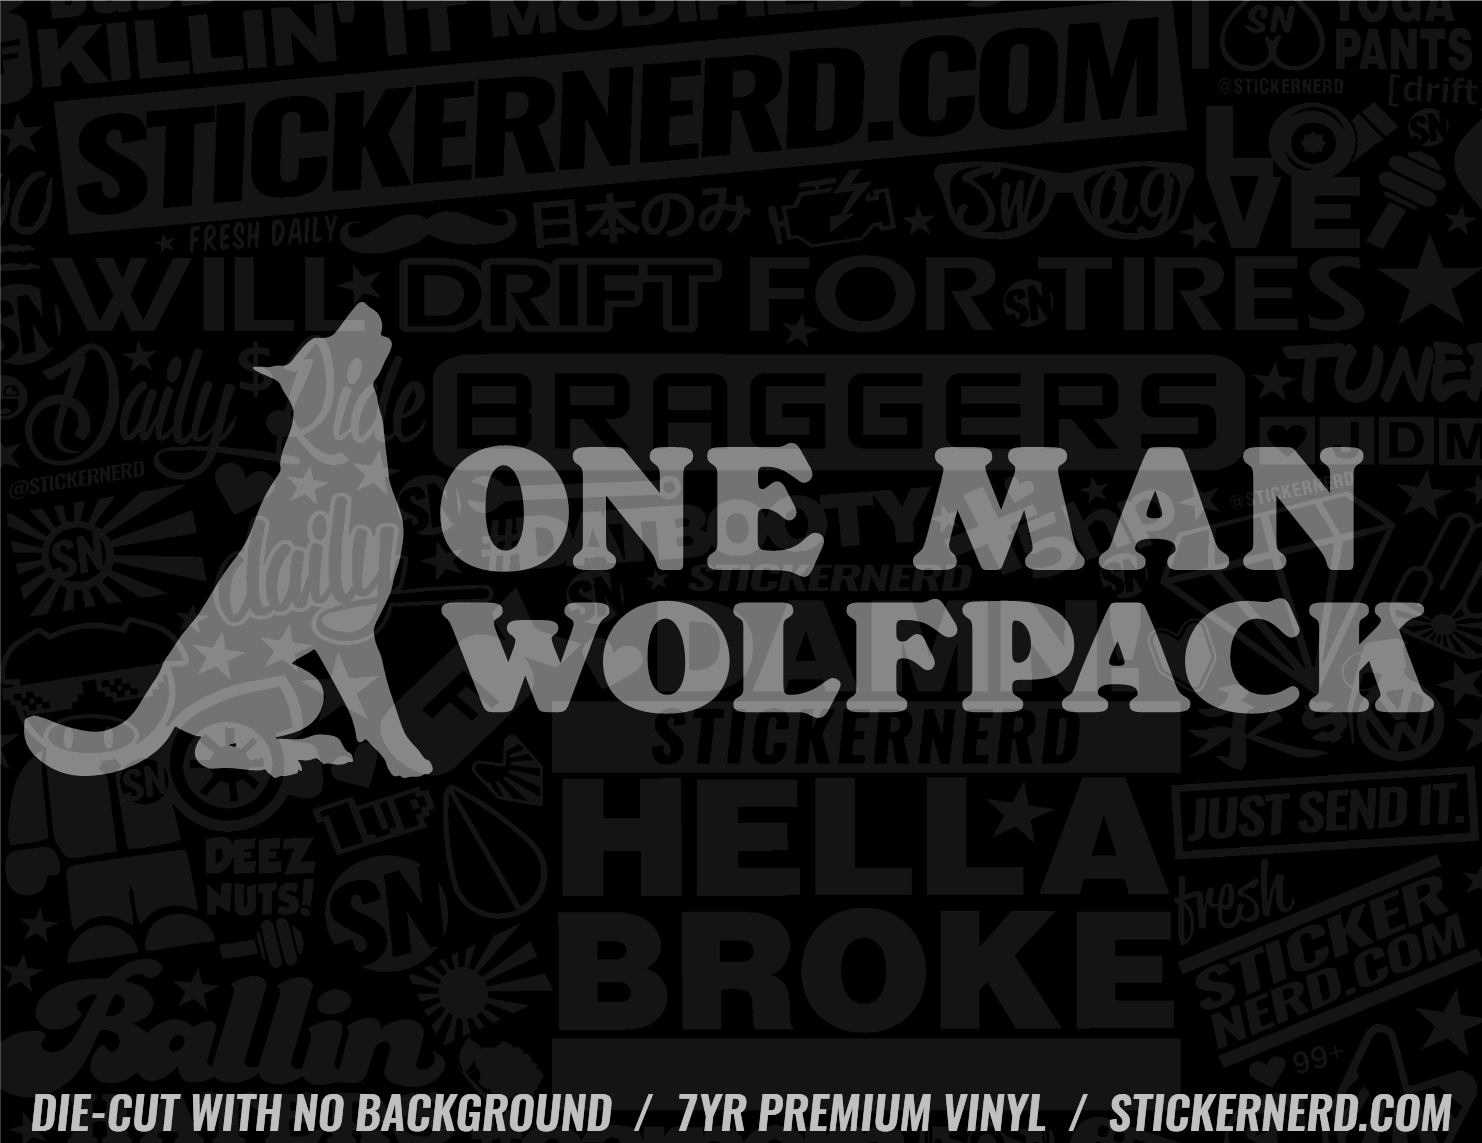 cool wolf pack logo